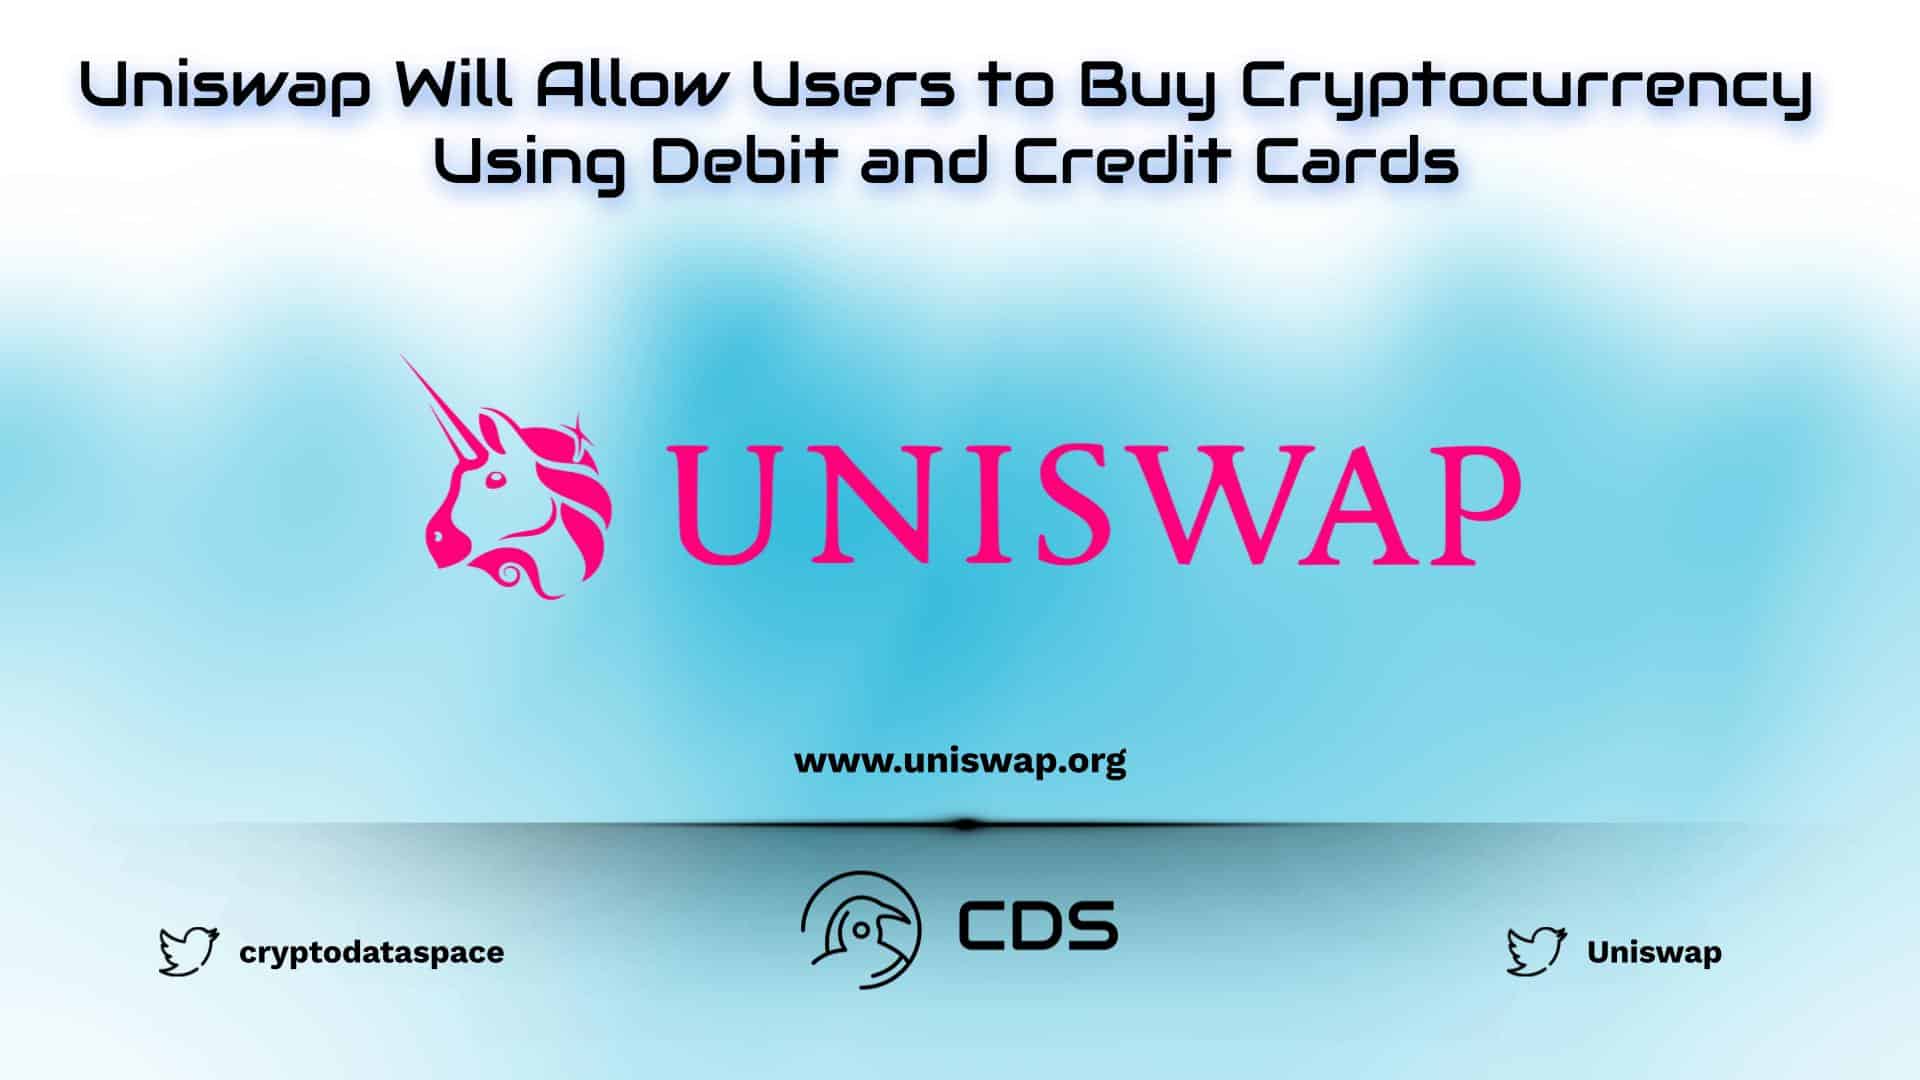 Uniswap Will Allow Users to Buy Cryptocurrency Using Debit and Credit Cards